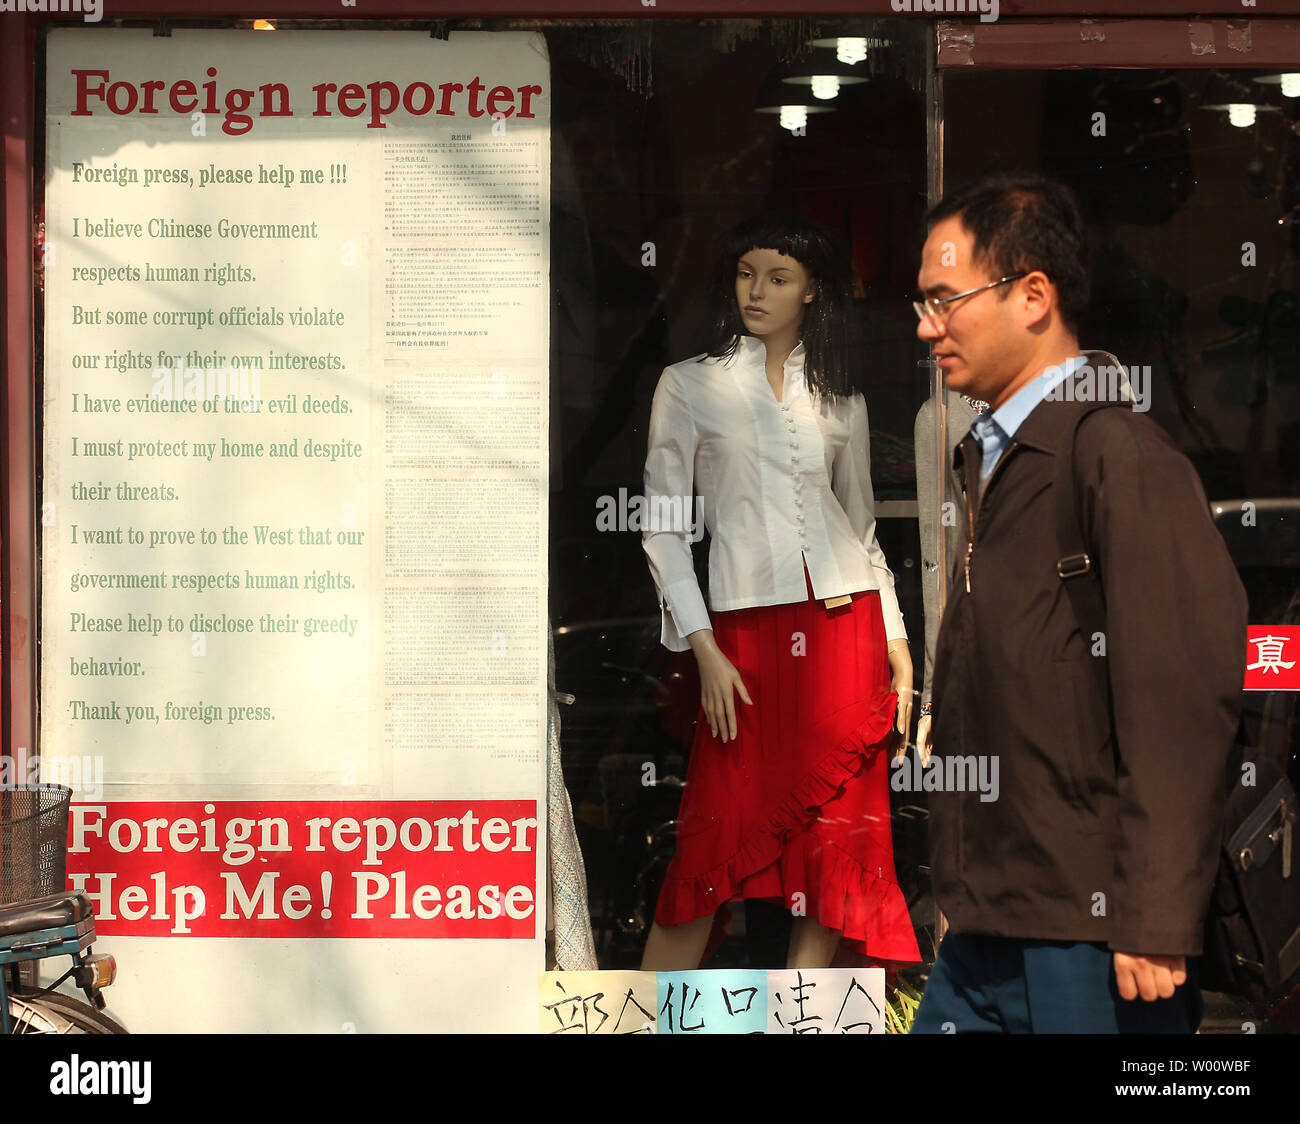 A Chinese man walks past a clothing store advertising a plea for help to foreign journalists for help against local corruption in Beijing February 22, 2011.  China must find new ways to defuse unrest, the country's  domestic security chief said this week, underscoring the capital's anxiety about control after police quashed calls for gatherings inspired by uprisings in the Middle East.     UPI/Stephen Shaver Stock Photo